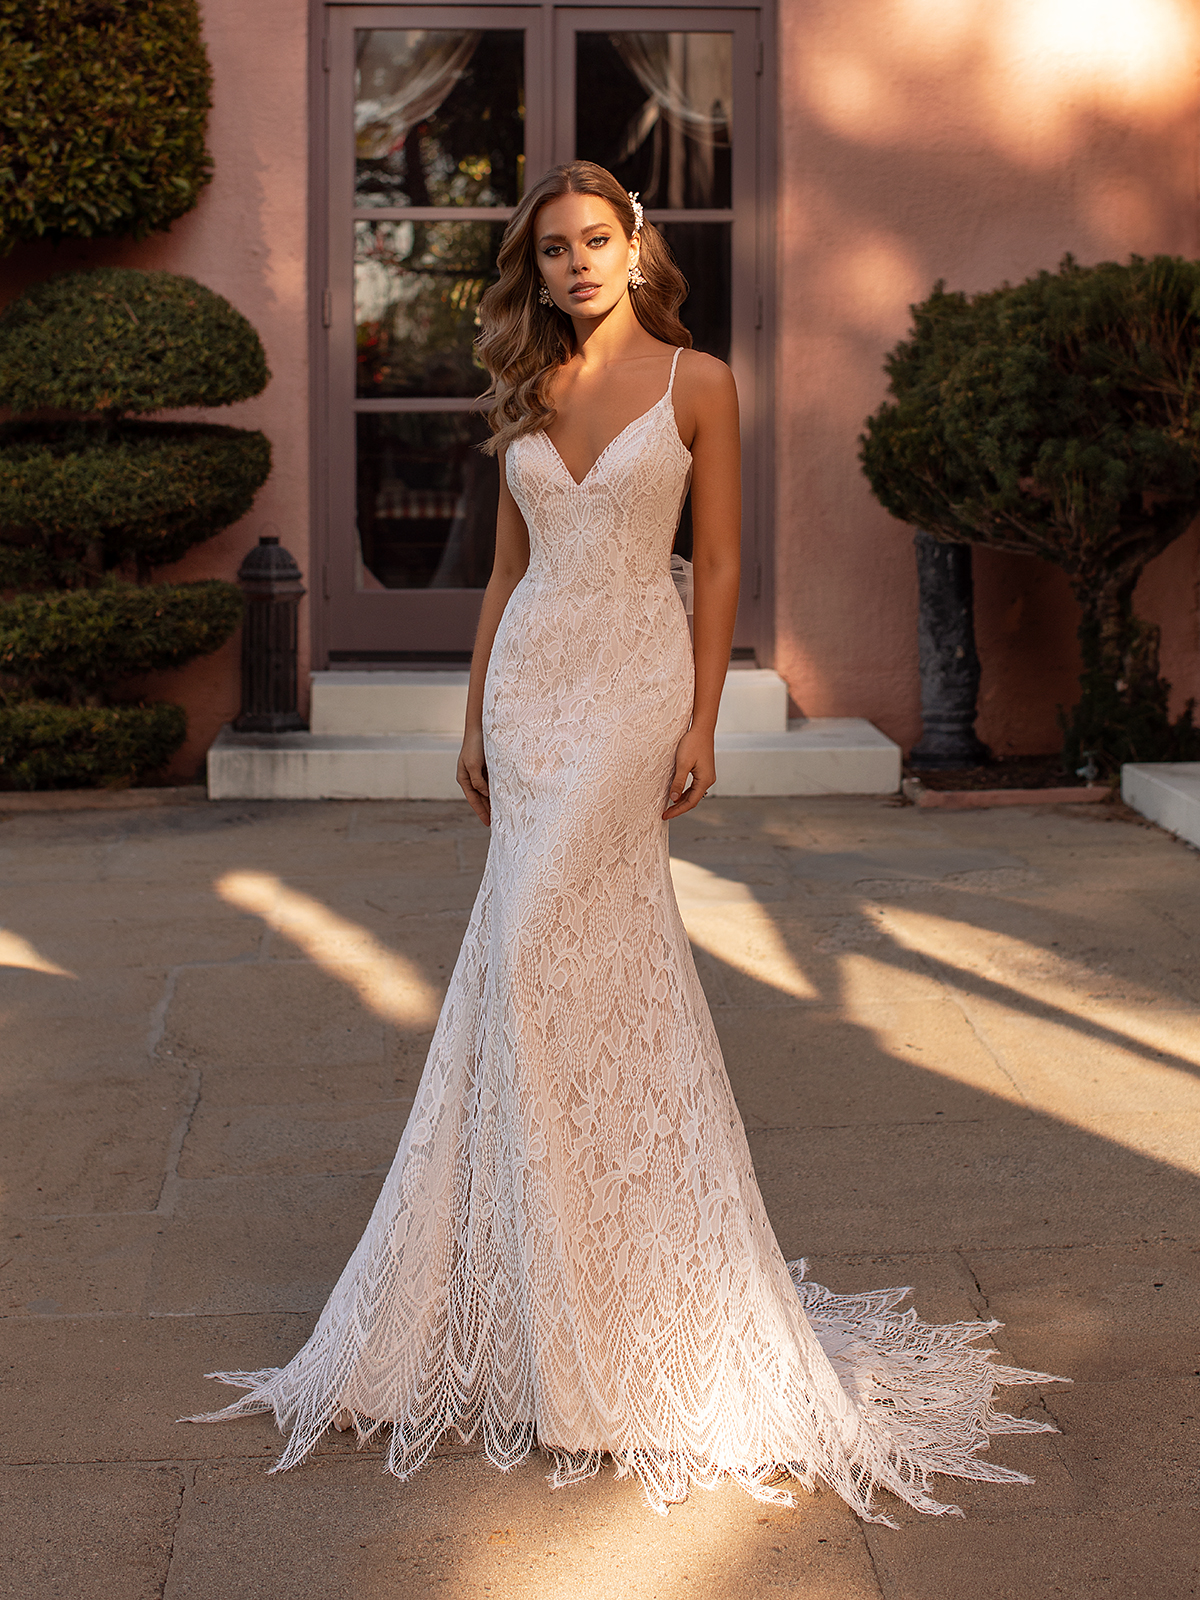 Shop Lace Wedding Dress in Auckland - Dell'Amore Bridal